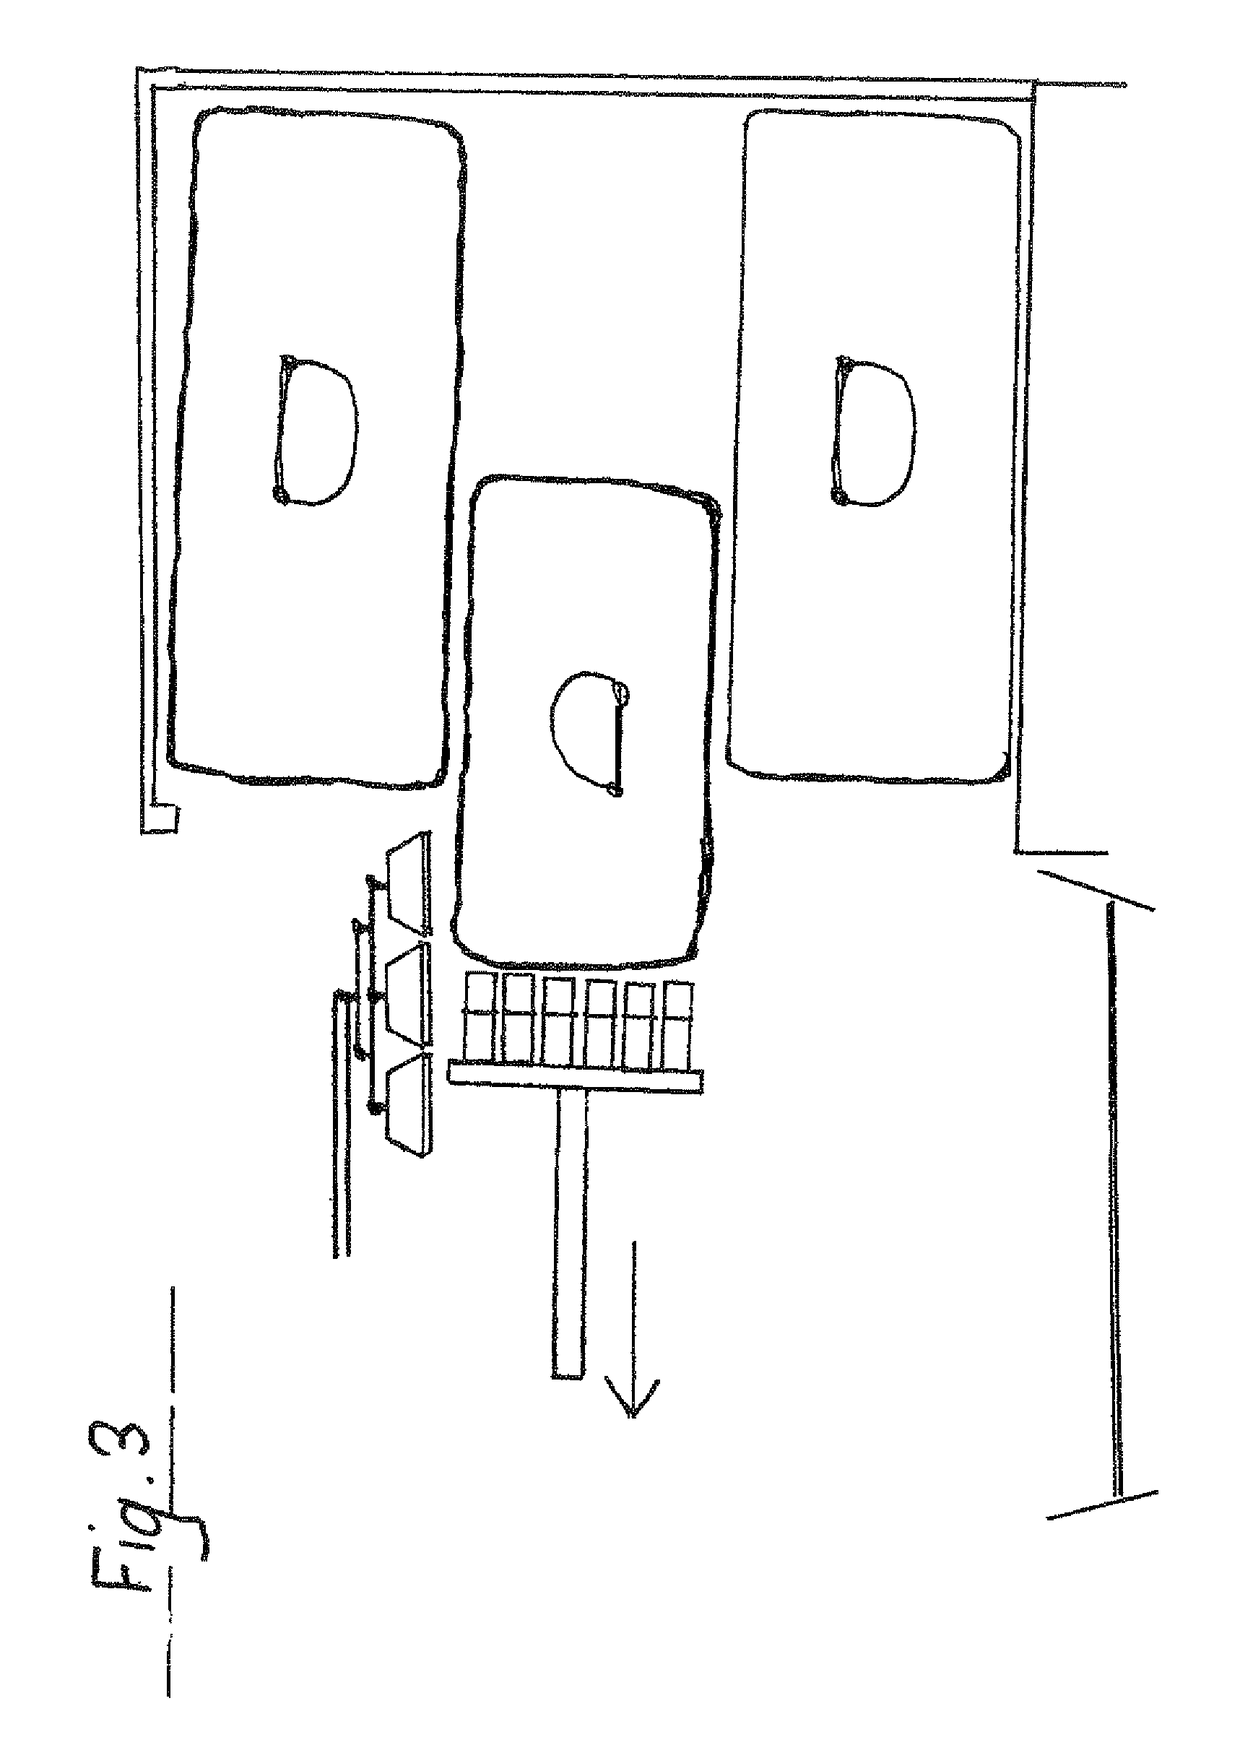 Method and apparatus for gripping and transferring pieces of luggage